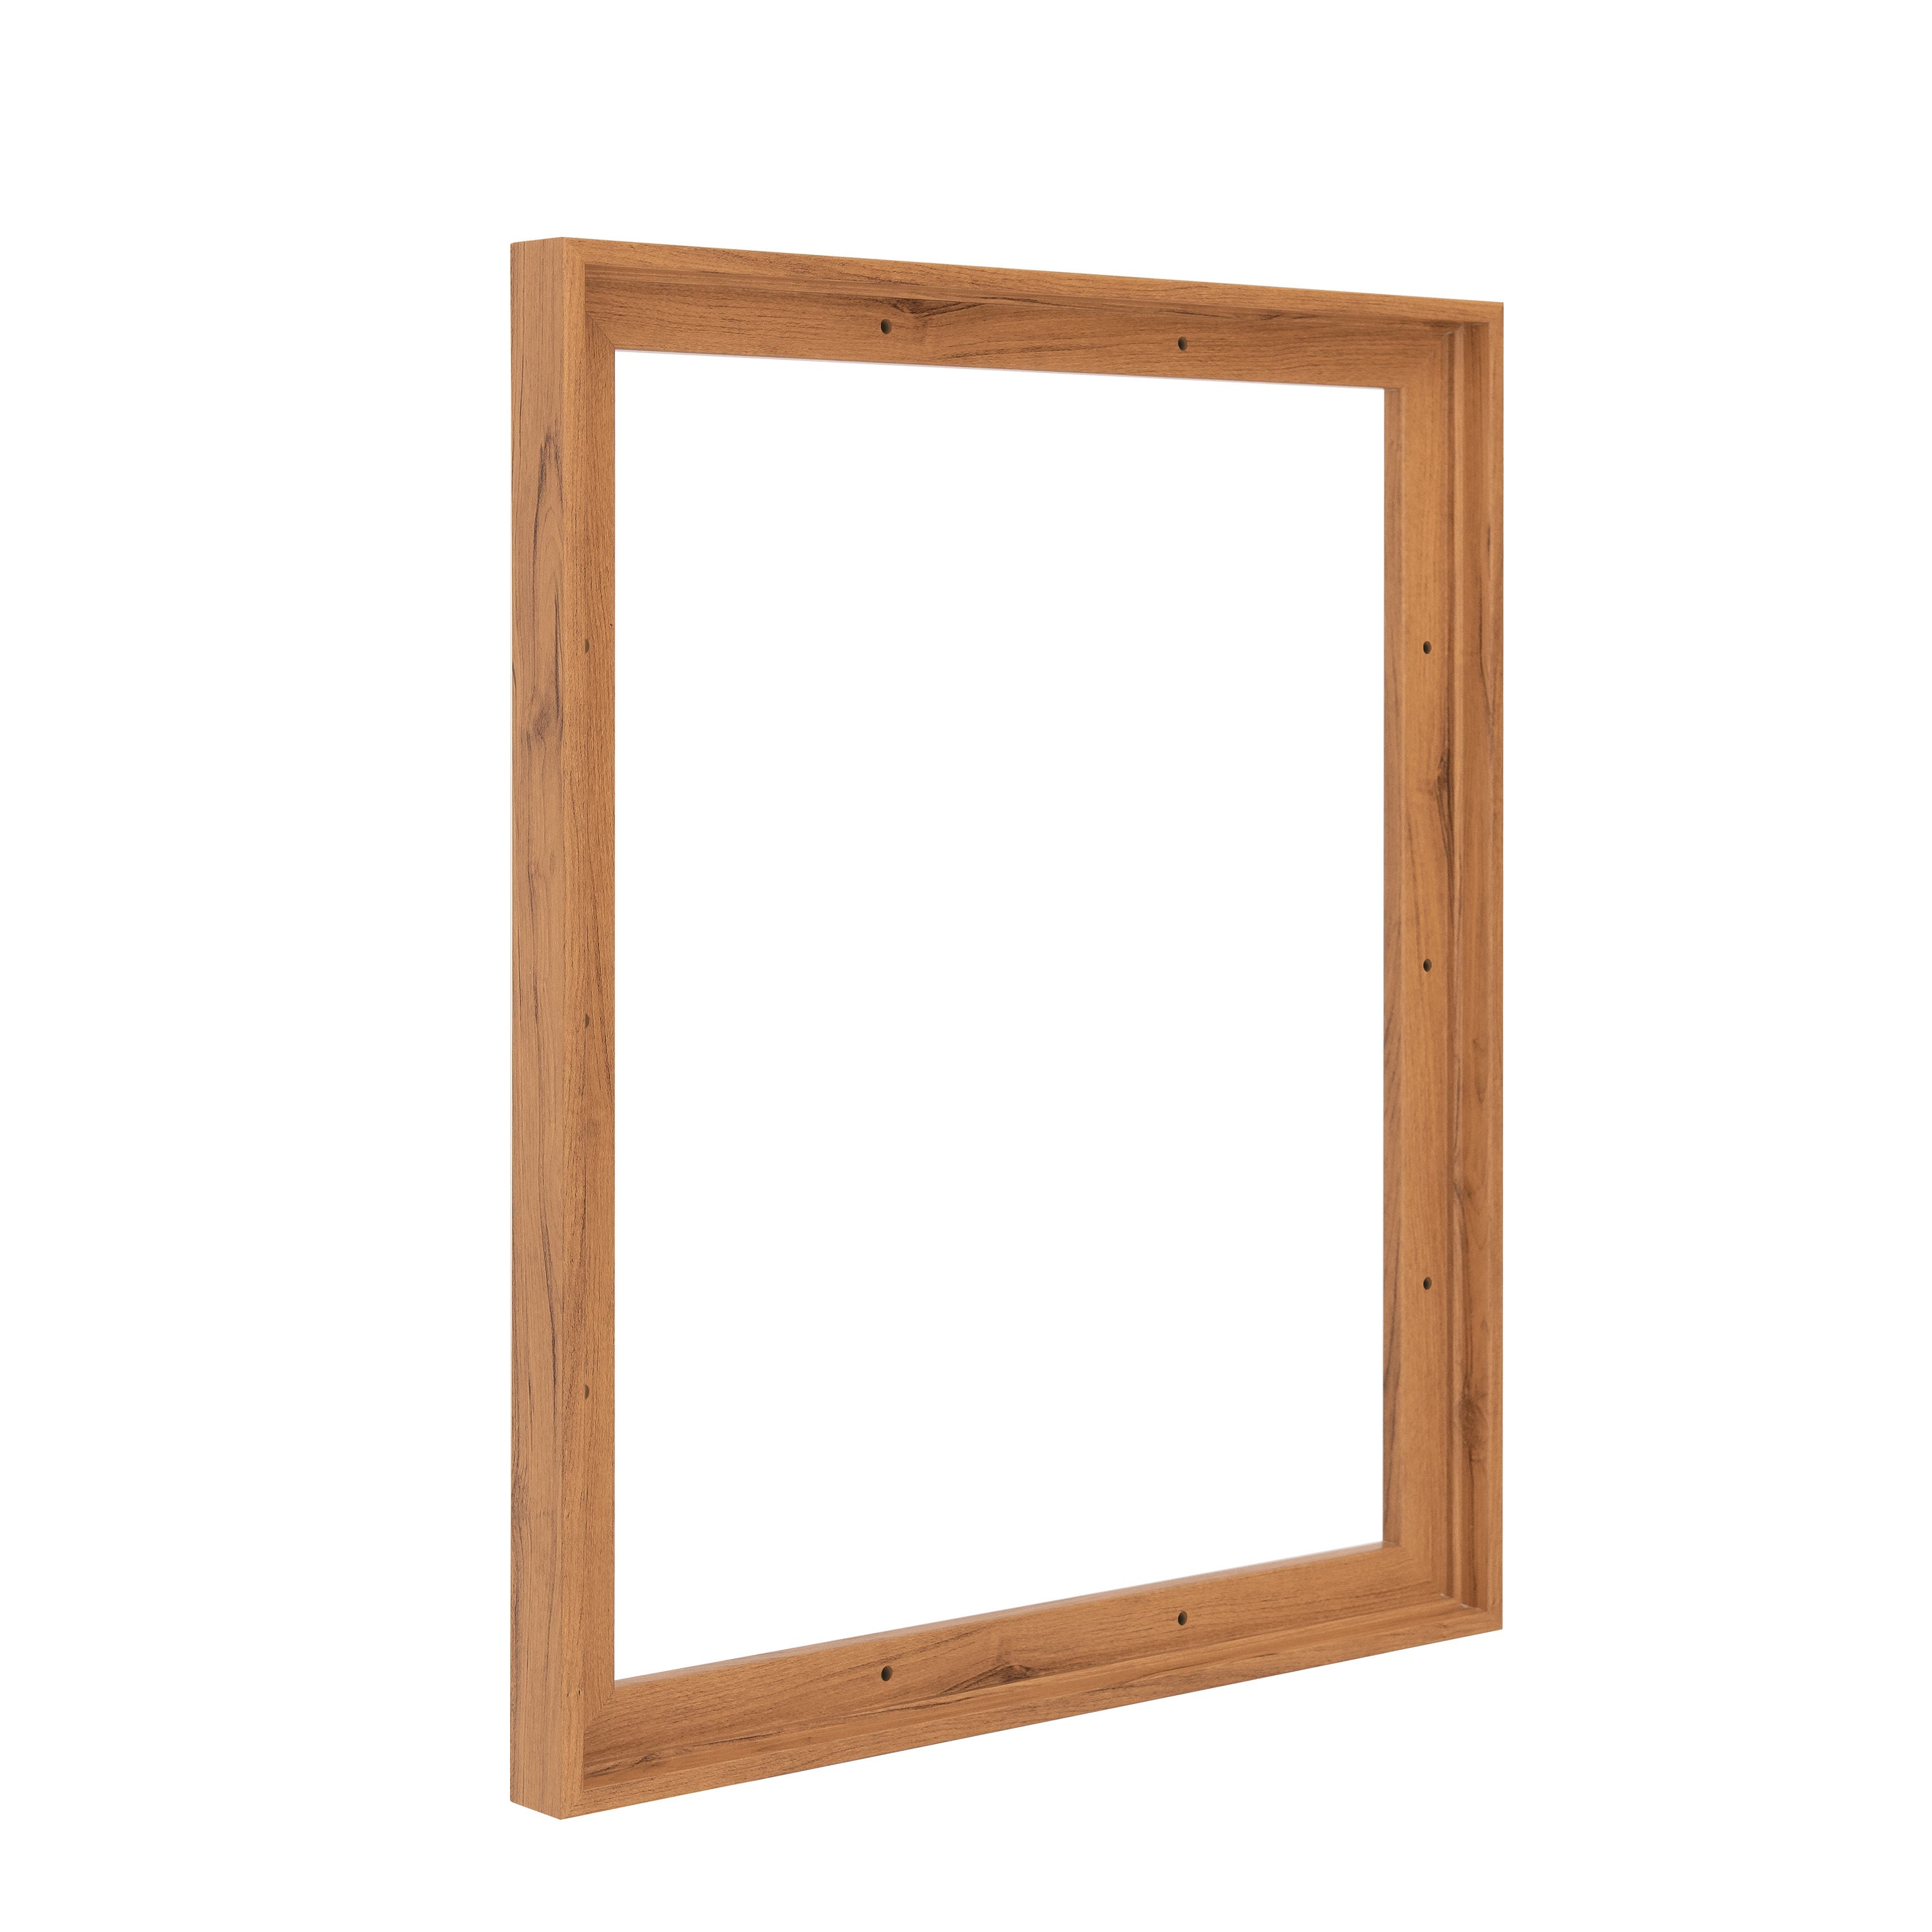 Jasart Thin Edge Floater Frame 16x20 Inch - Natural